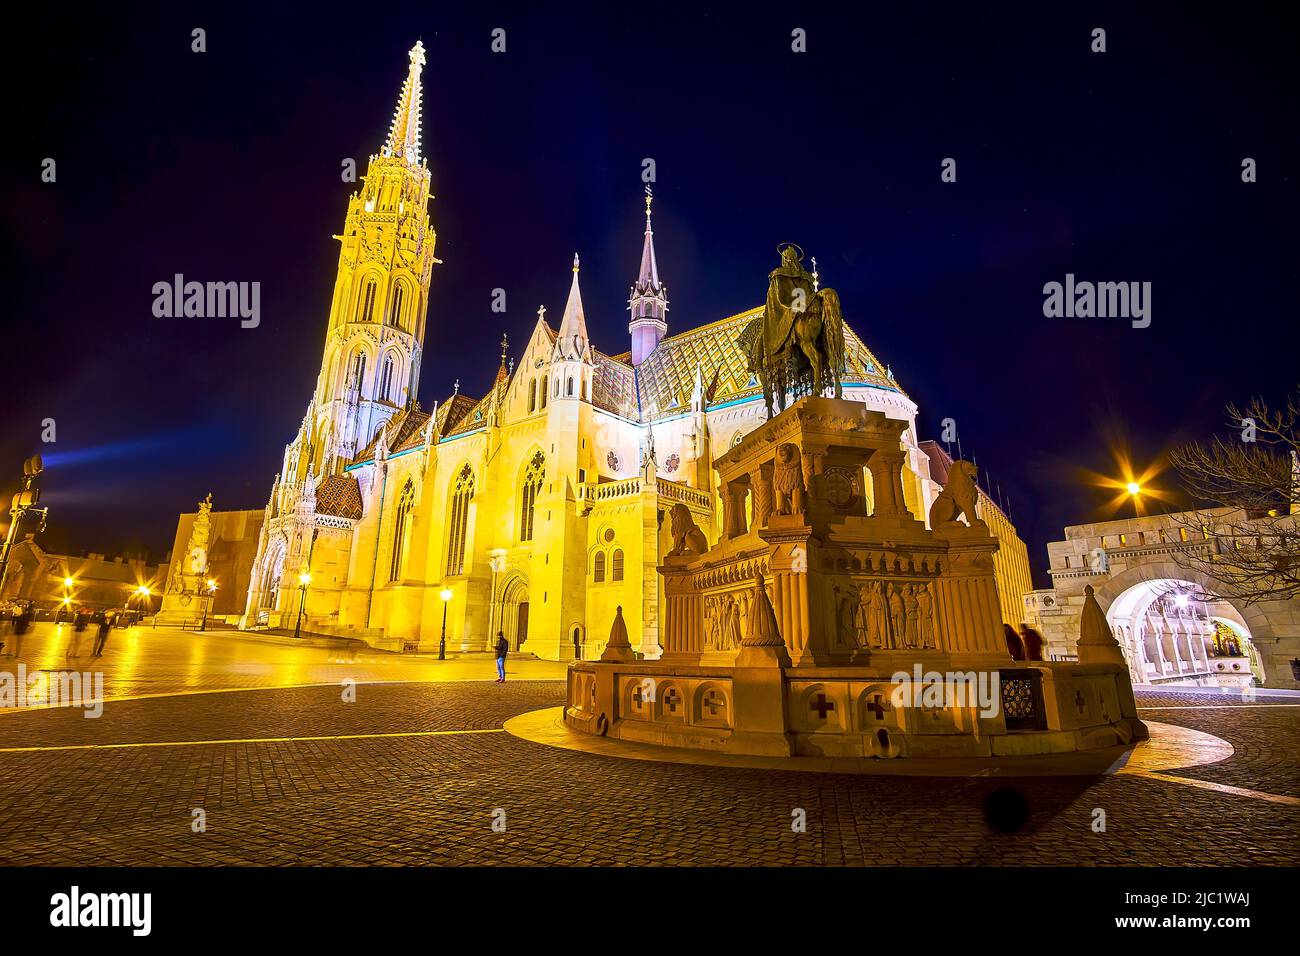 Fisherman's Bastion with monument to St Stephen and Matthias Church in night illumination, Budapest, hungary Stock Photo